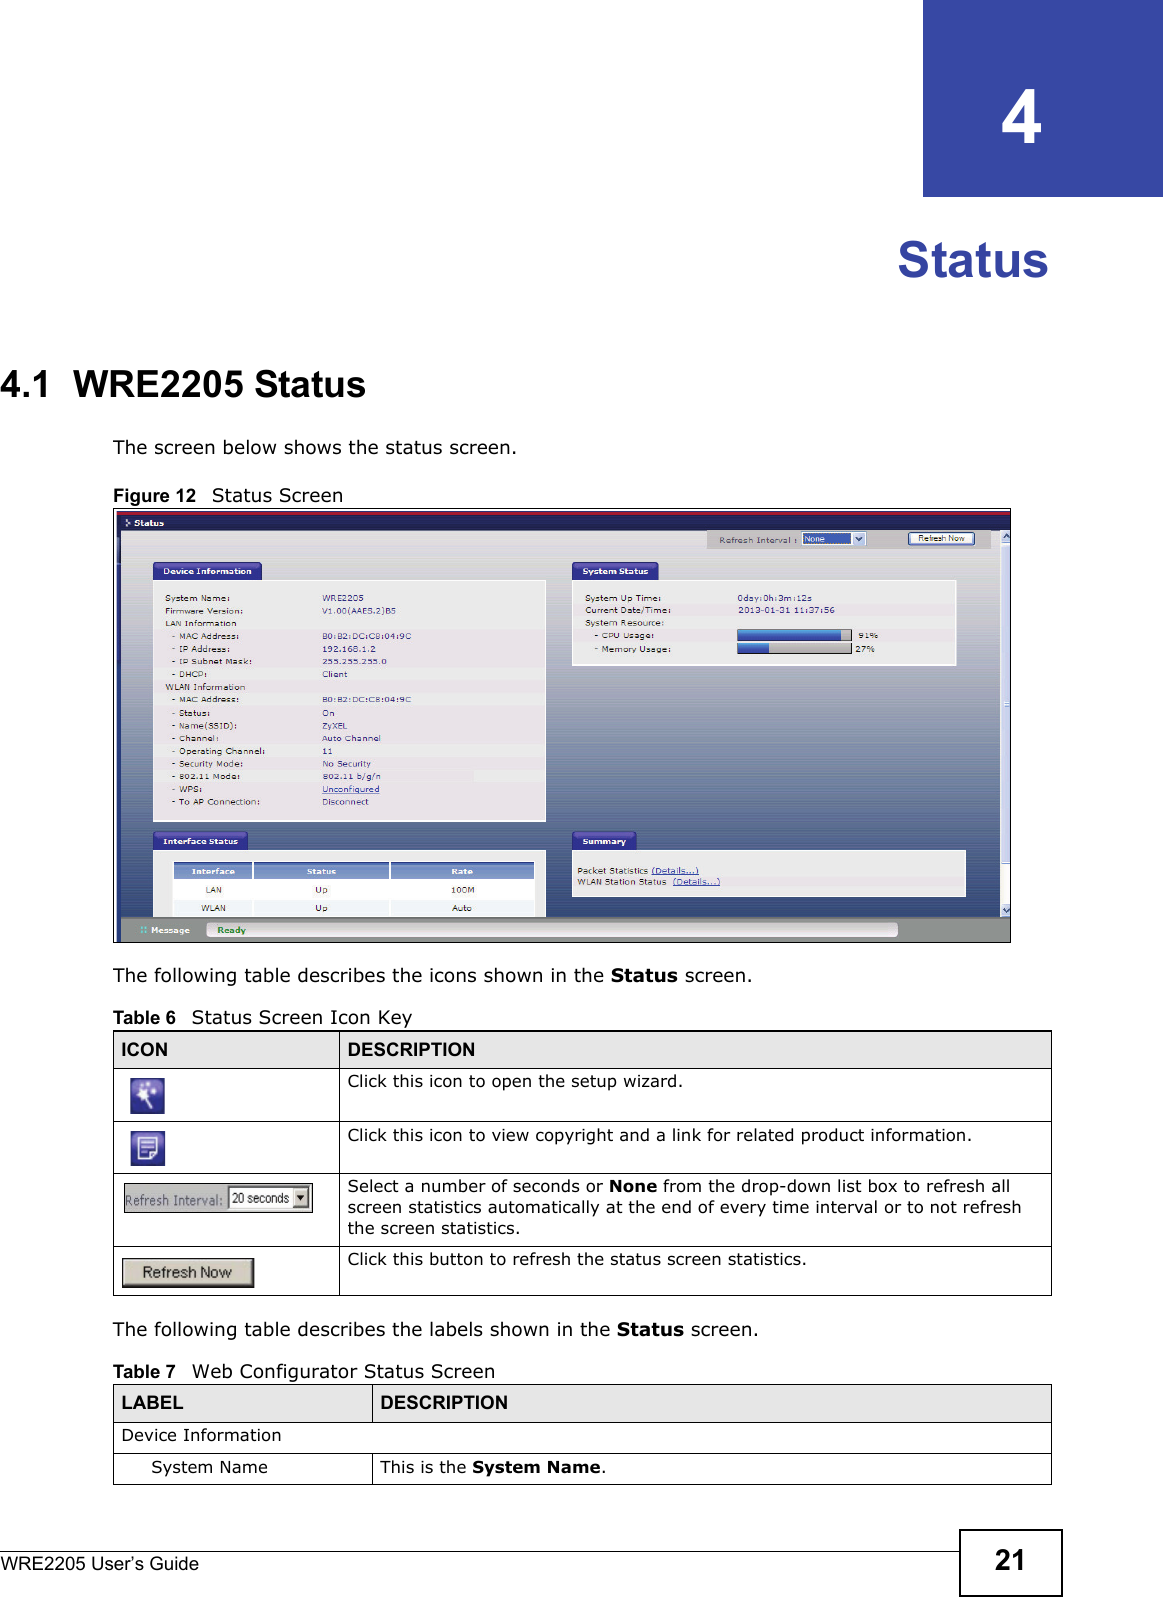 WRE2205 User’s Guide 21CHAPTER   4Status4.1  WRE2205 StatusThe screen below shows the status screen. Figure 12   Status Screen The following table describes the icons shown in the Status screen.The following table describes the labels shown in the Status screen.Table 6   Status Screen Icon Key ICON DESCRIPTIONClick this icon to open the setup wizard. Click this icon to view copyright and a link for related product information.Select a number of seconds or None from the drop-down list box to refresh all screen statistics automatically at the end of every time interval or to not refresh the screen statistics.Click this button to refresh the status screen statistics.Table 7   Web Configurator Status Screen  LABEL DESCRIPTIONDevice InformationSystem Name This is the System Name.